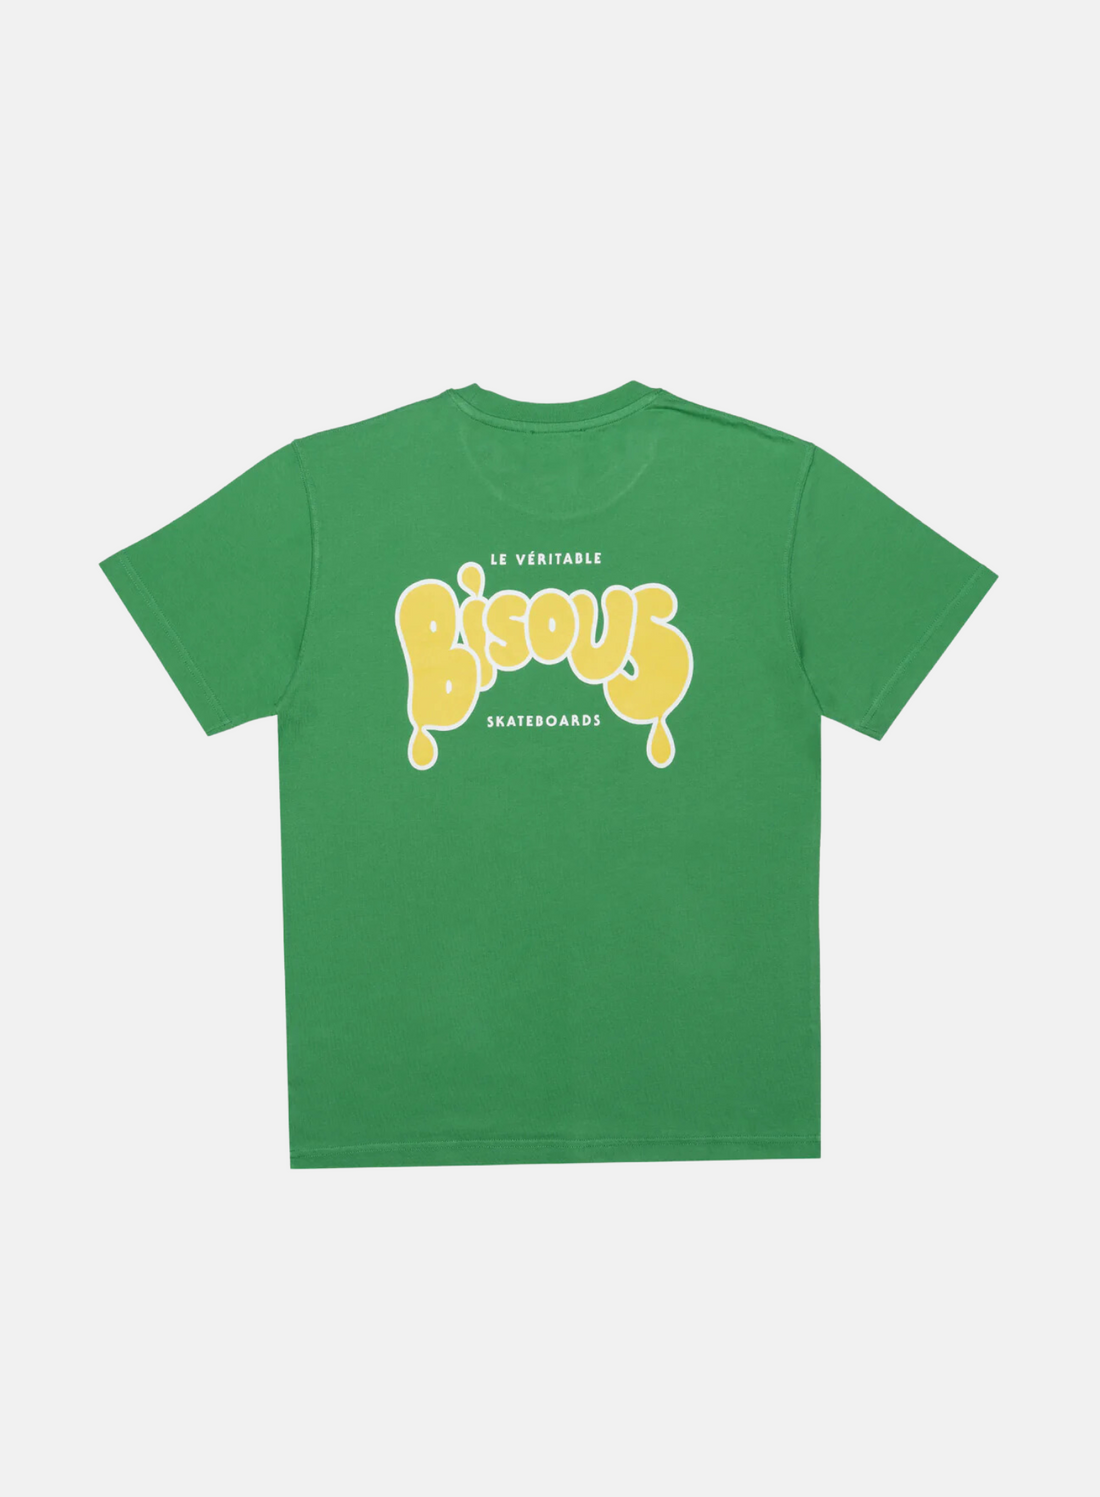 BISOUS SKATEBOARDS SS Veritable Tee Green - Hympala Store 